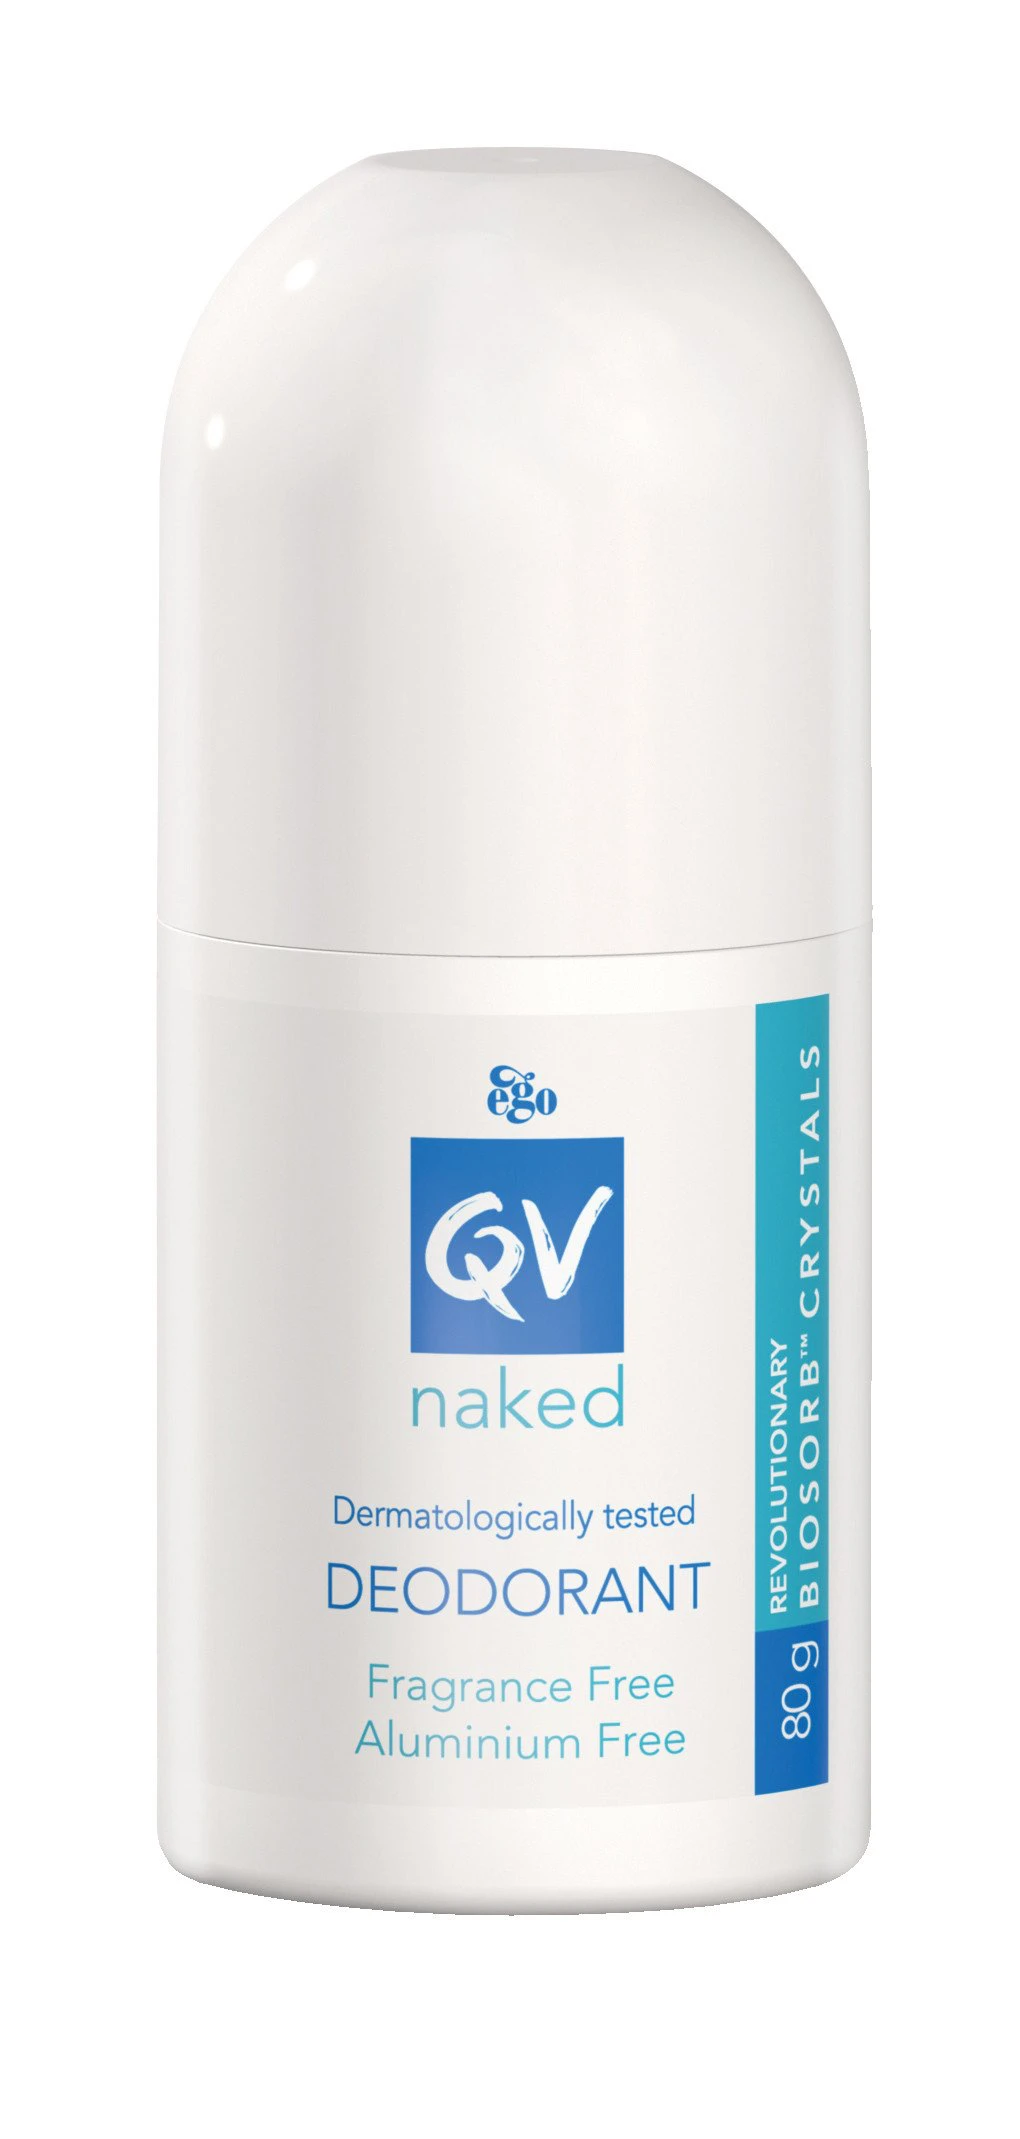 naked dermotologically tested deodorant